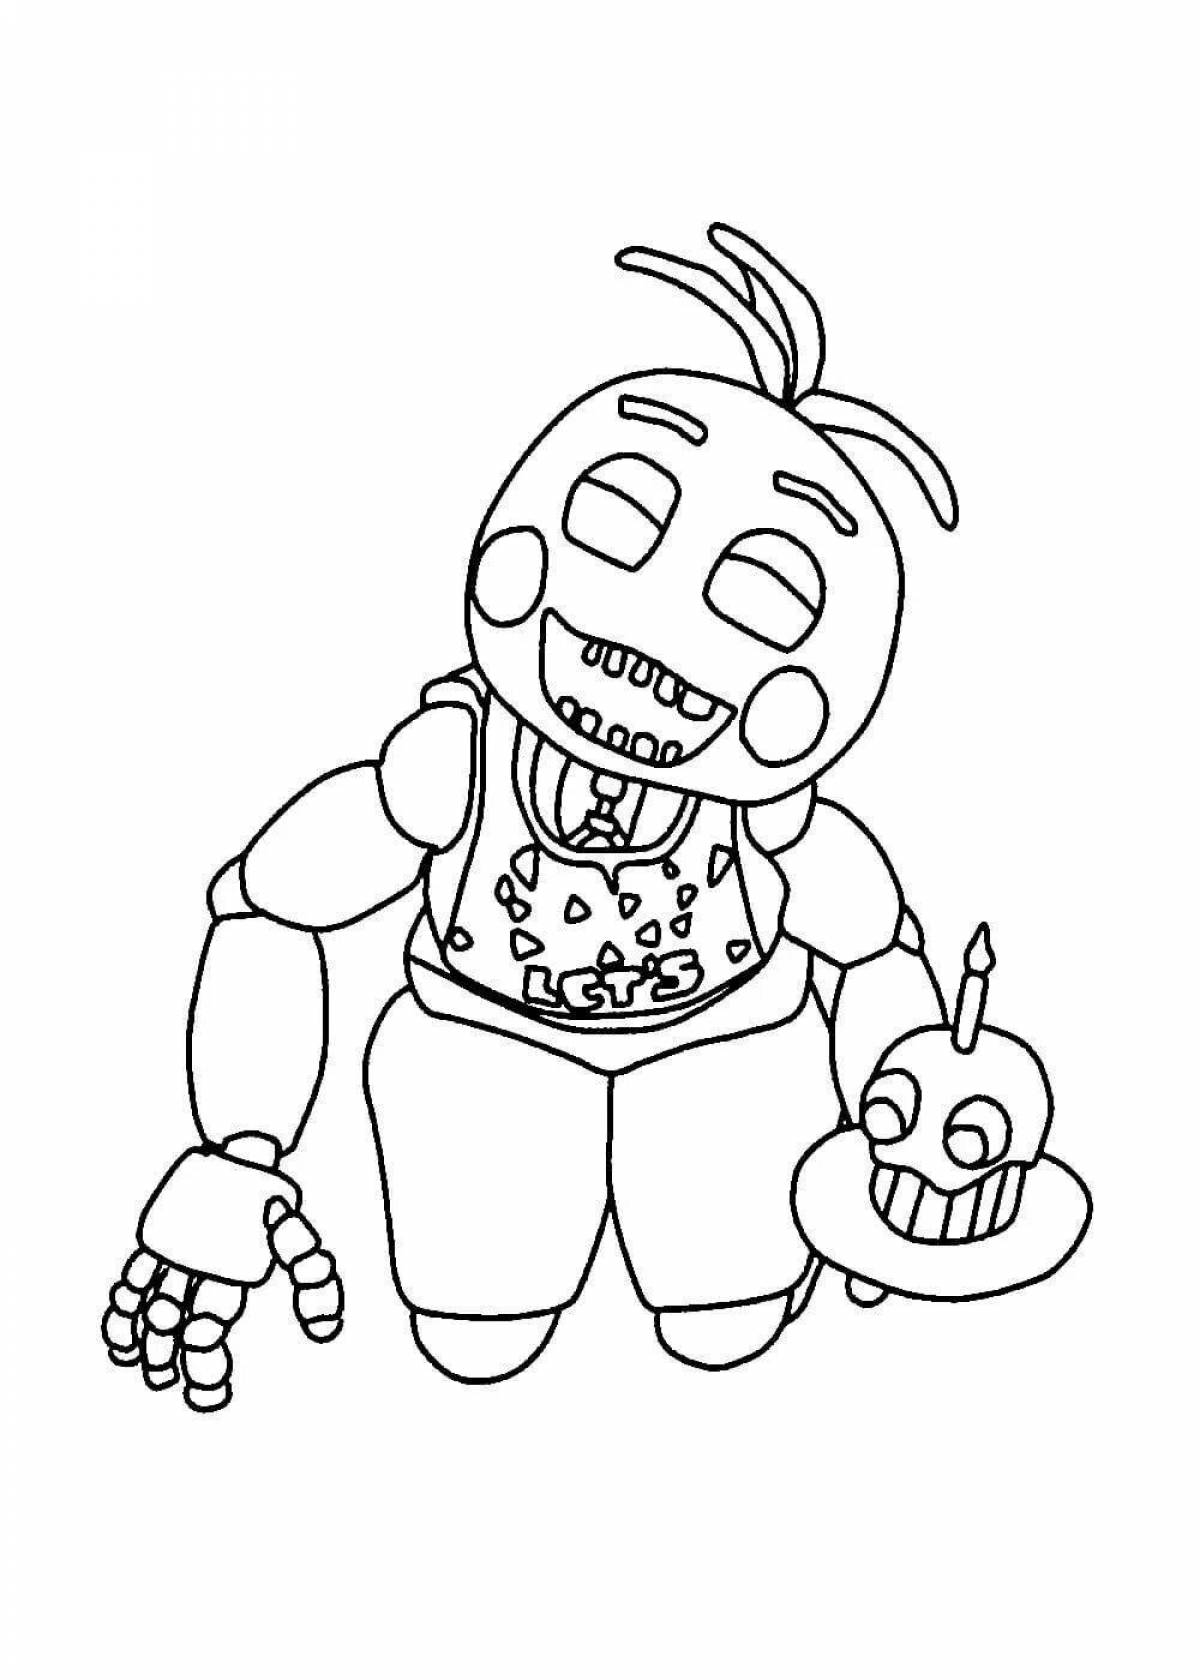 Cute animatronics all coloring pages